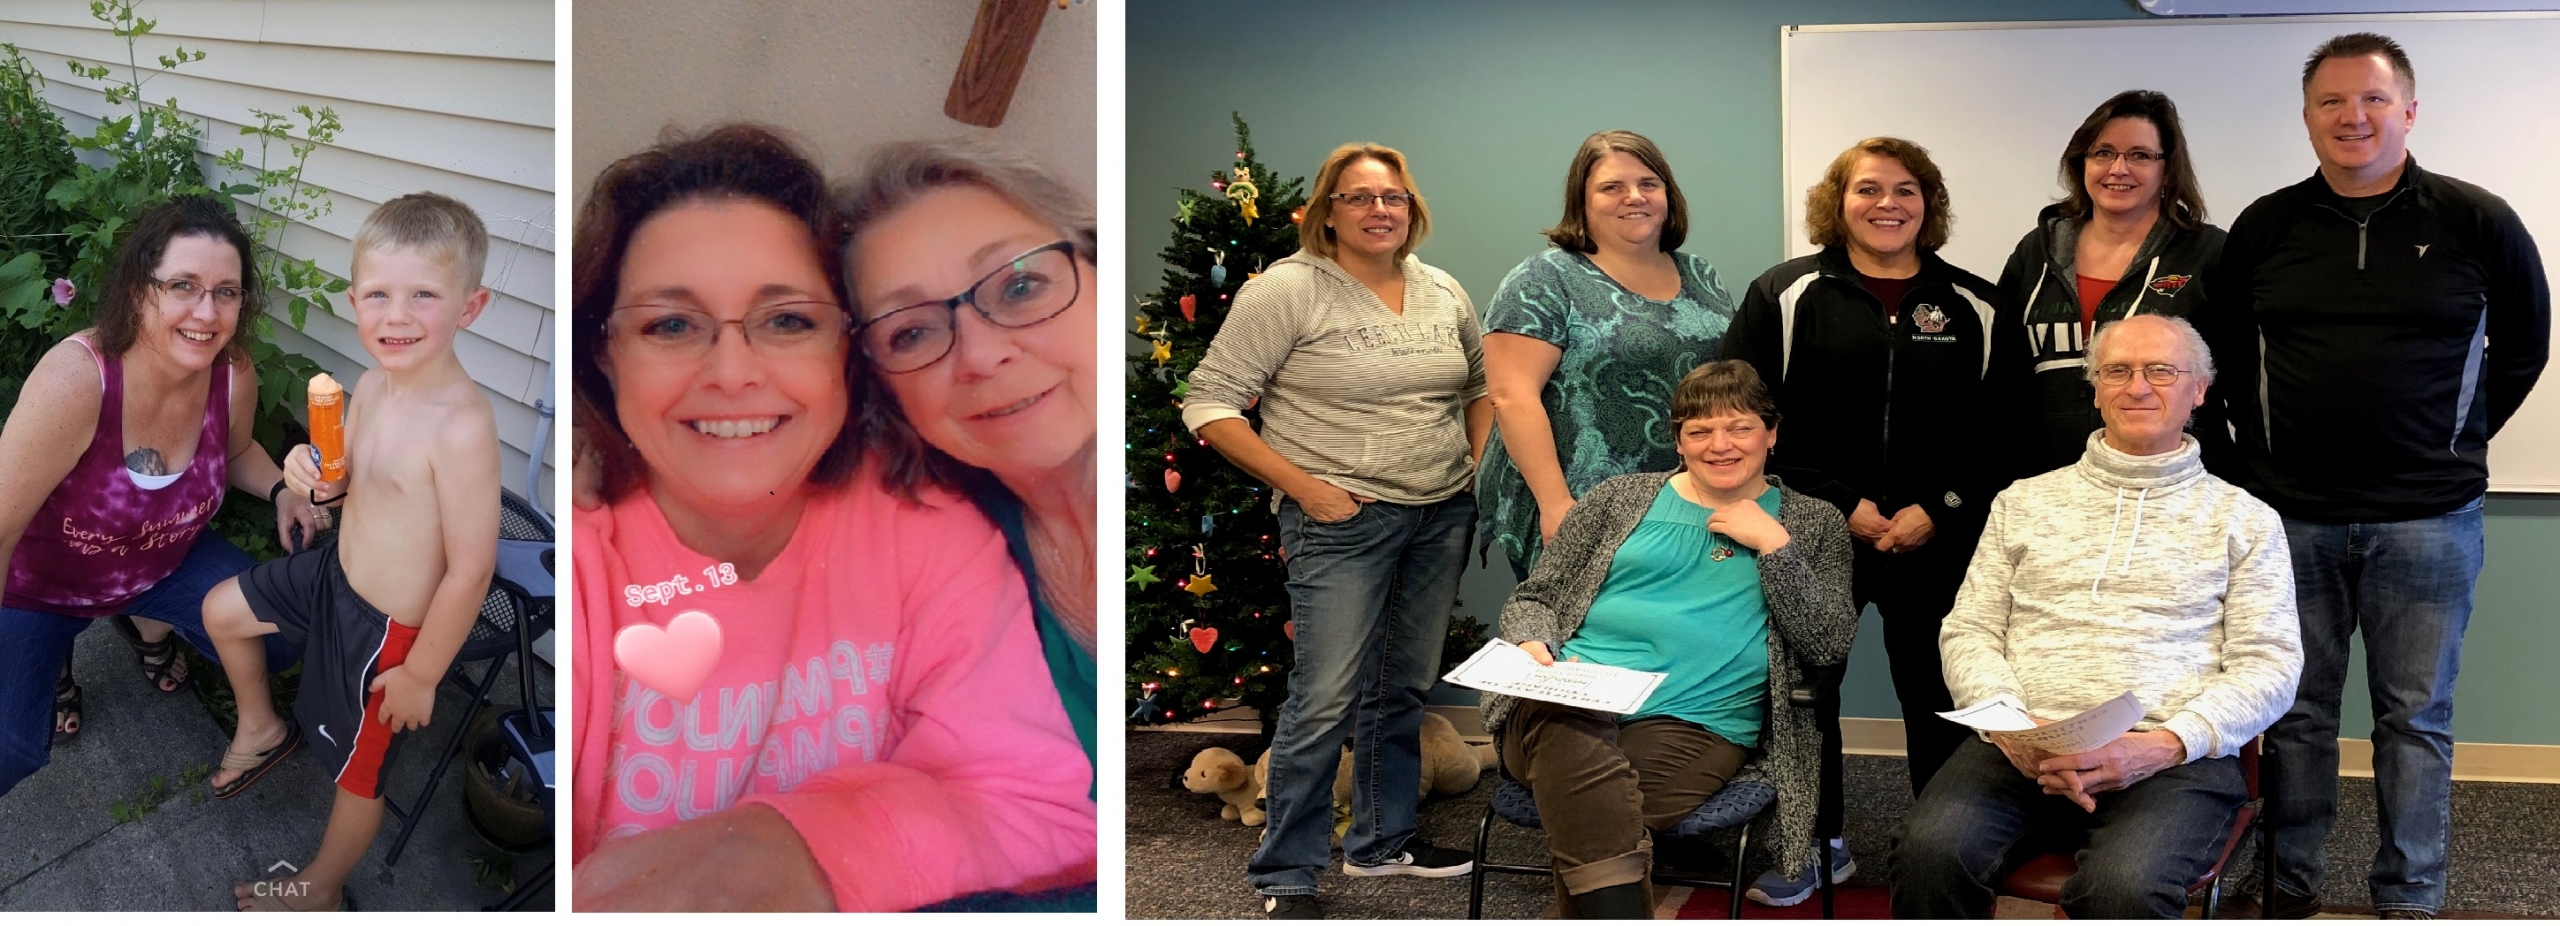 Pam in three pictures.  The first picture she is in a picture with her grand son.  The second image she is in a close up image with her mother.  The third image she is in the back row, second from left with other NDVS/SB adult team members and two clients during a short-term program. 